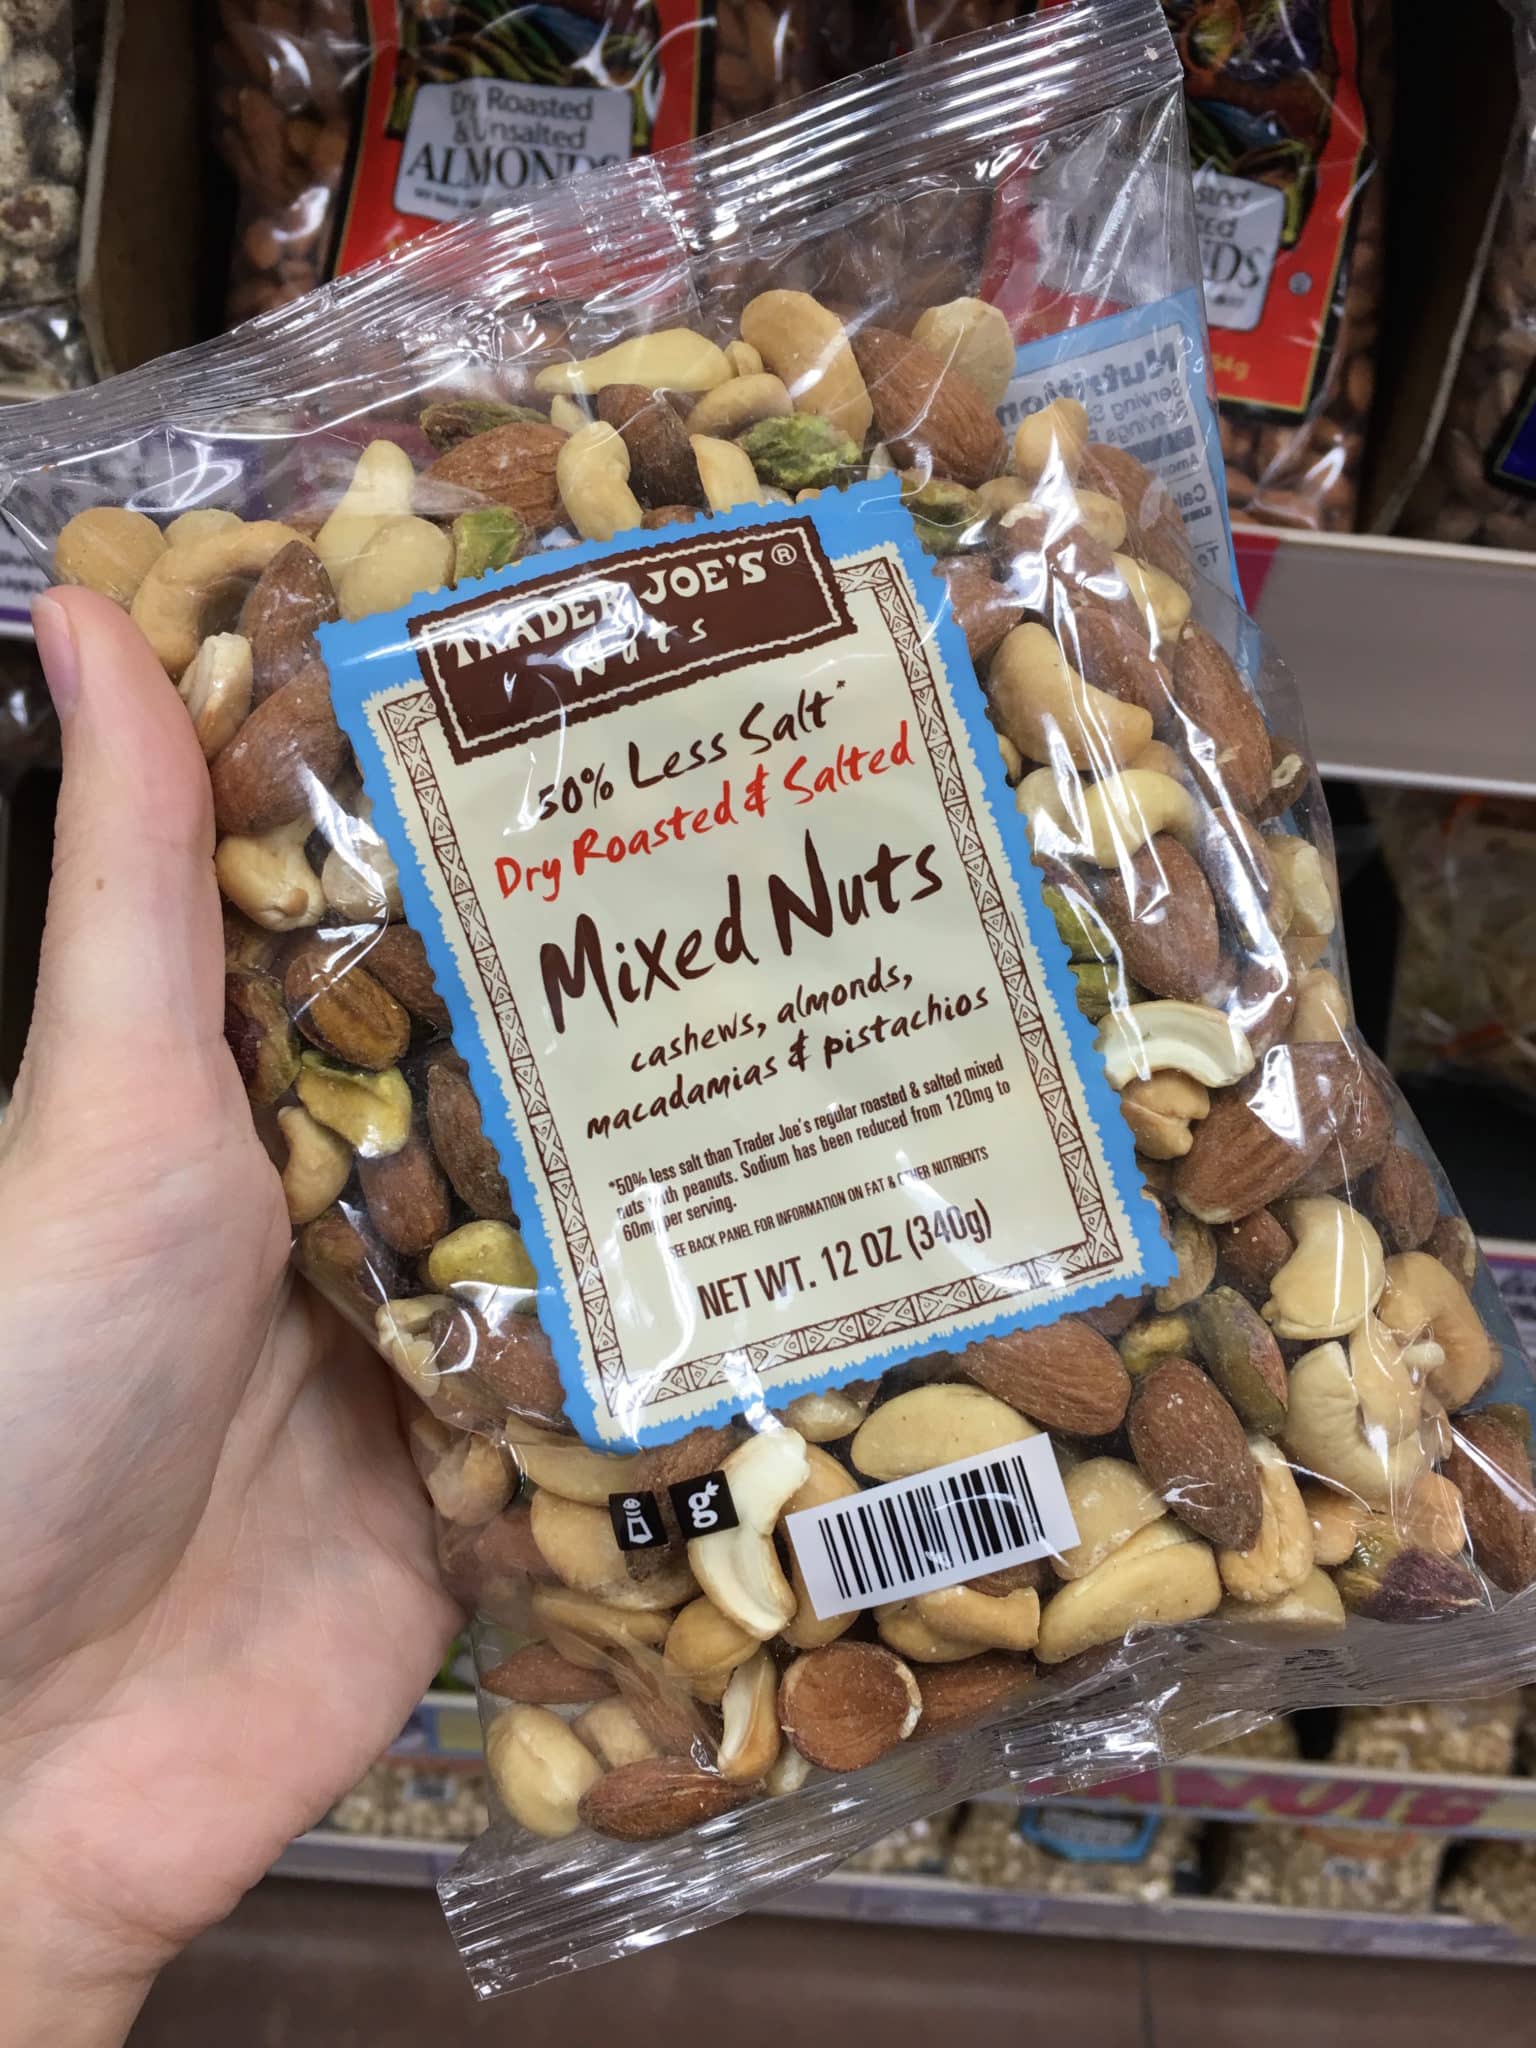 We love Trader Joe's: here are our fave products. #traderjoes